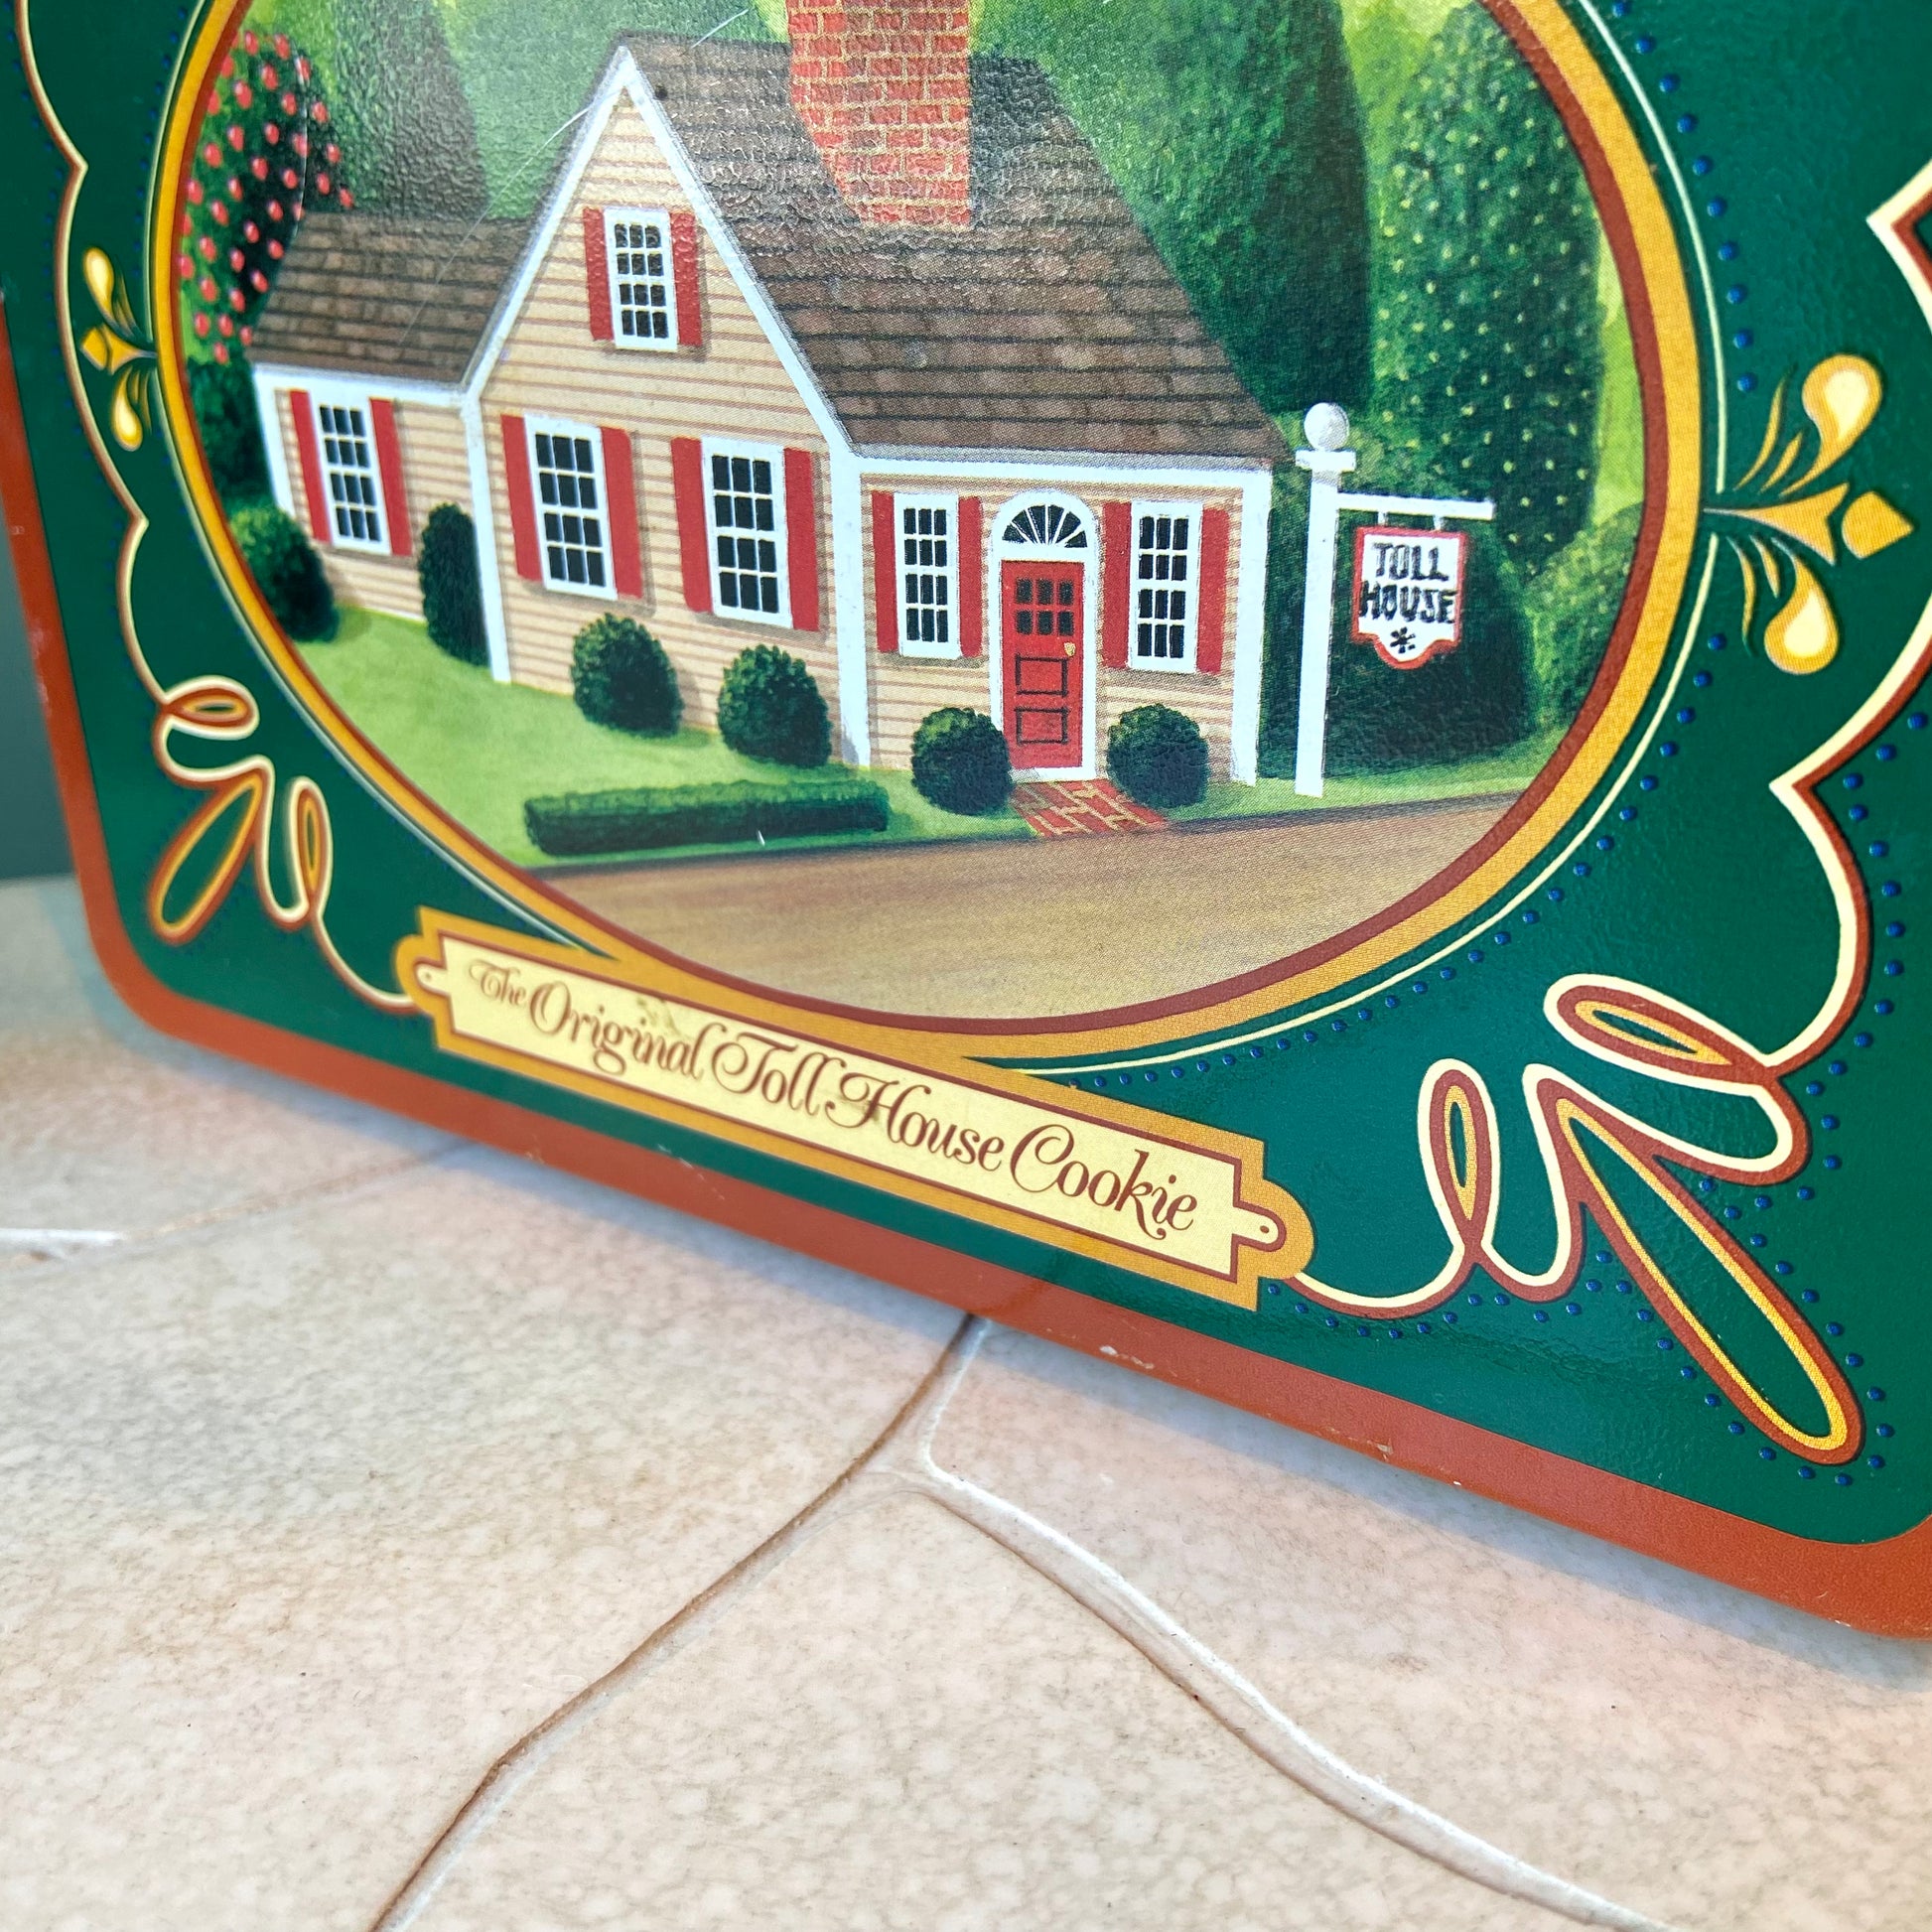 Vintage Toll House Cookie Tin Box – The Swan's House